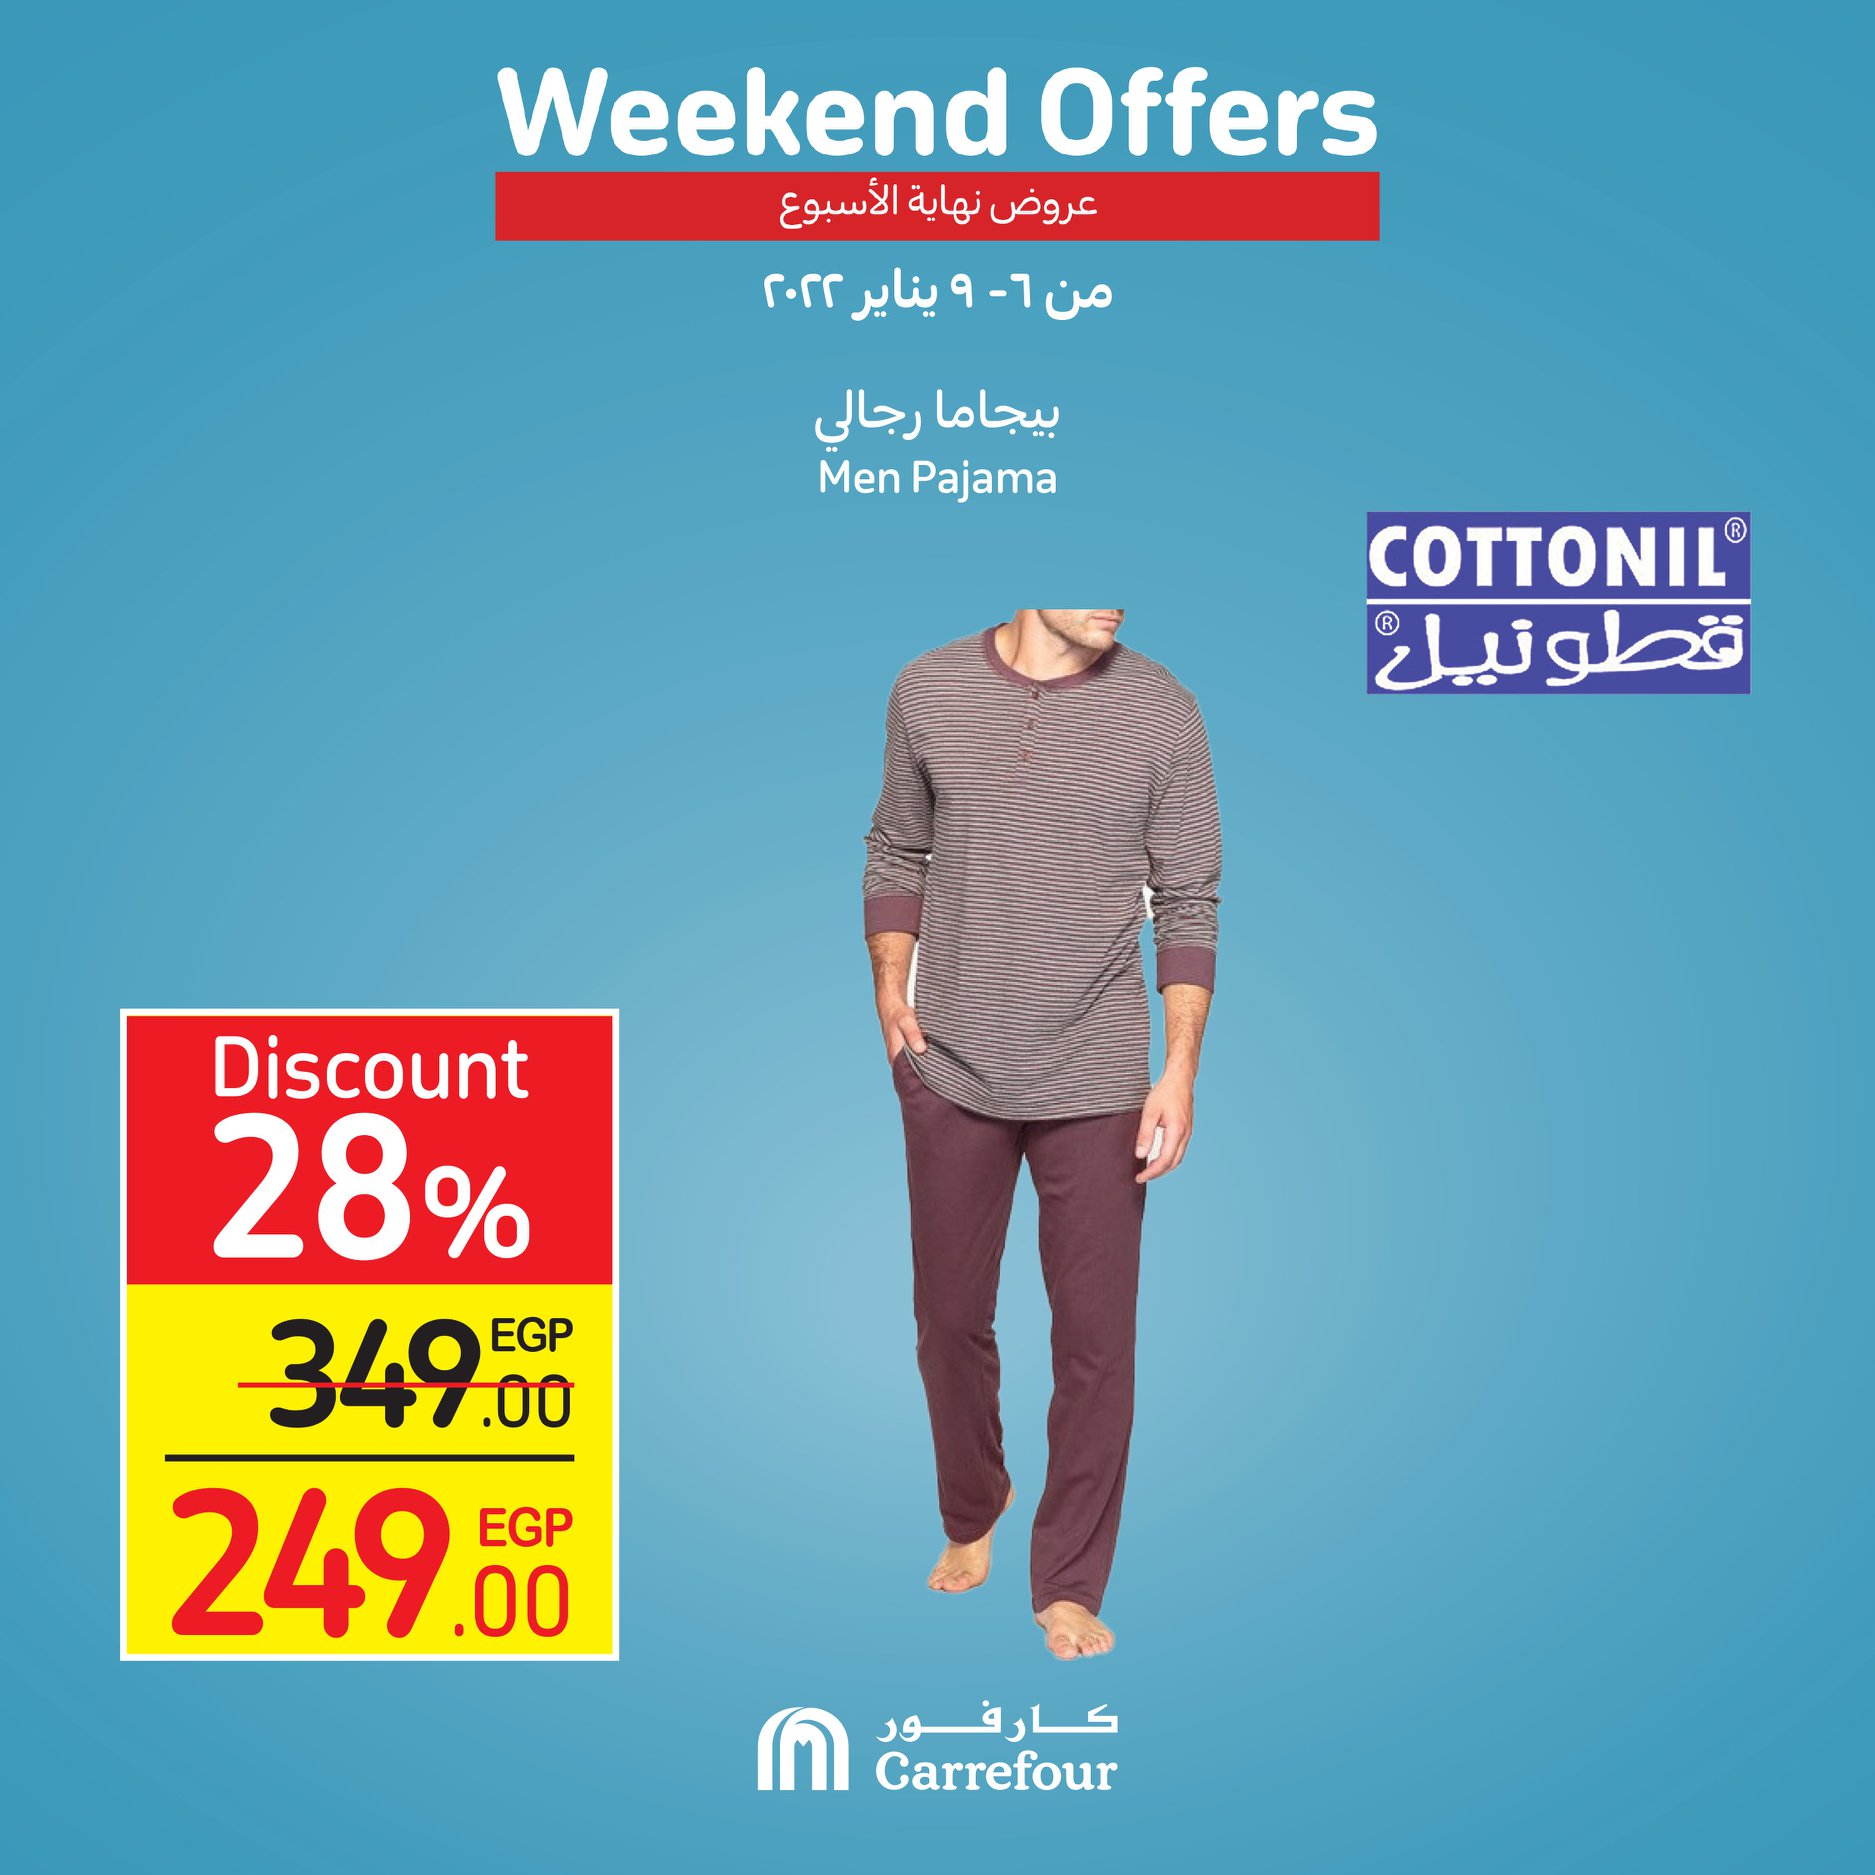 Now, the strongest Carrefour offers and surprises, half-price discounts, at Weekend until January 16th, 44